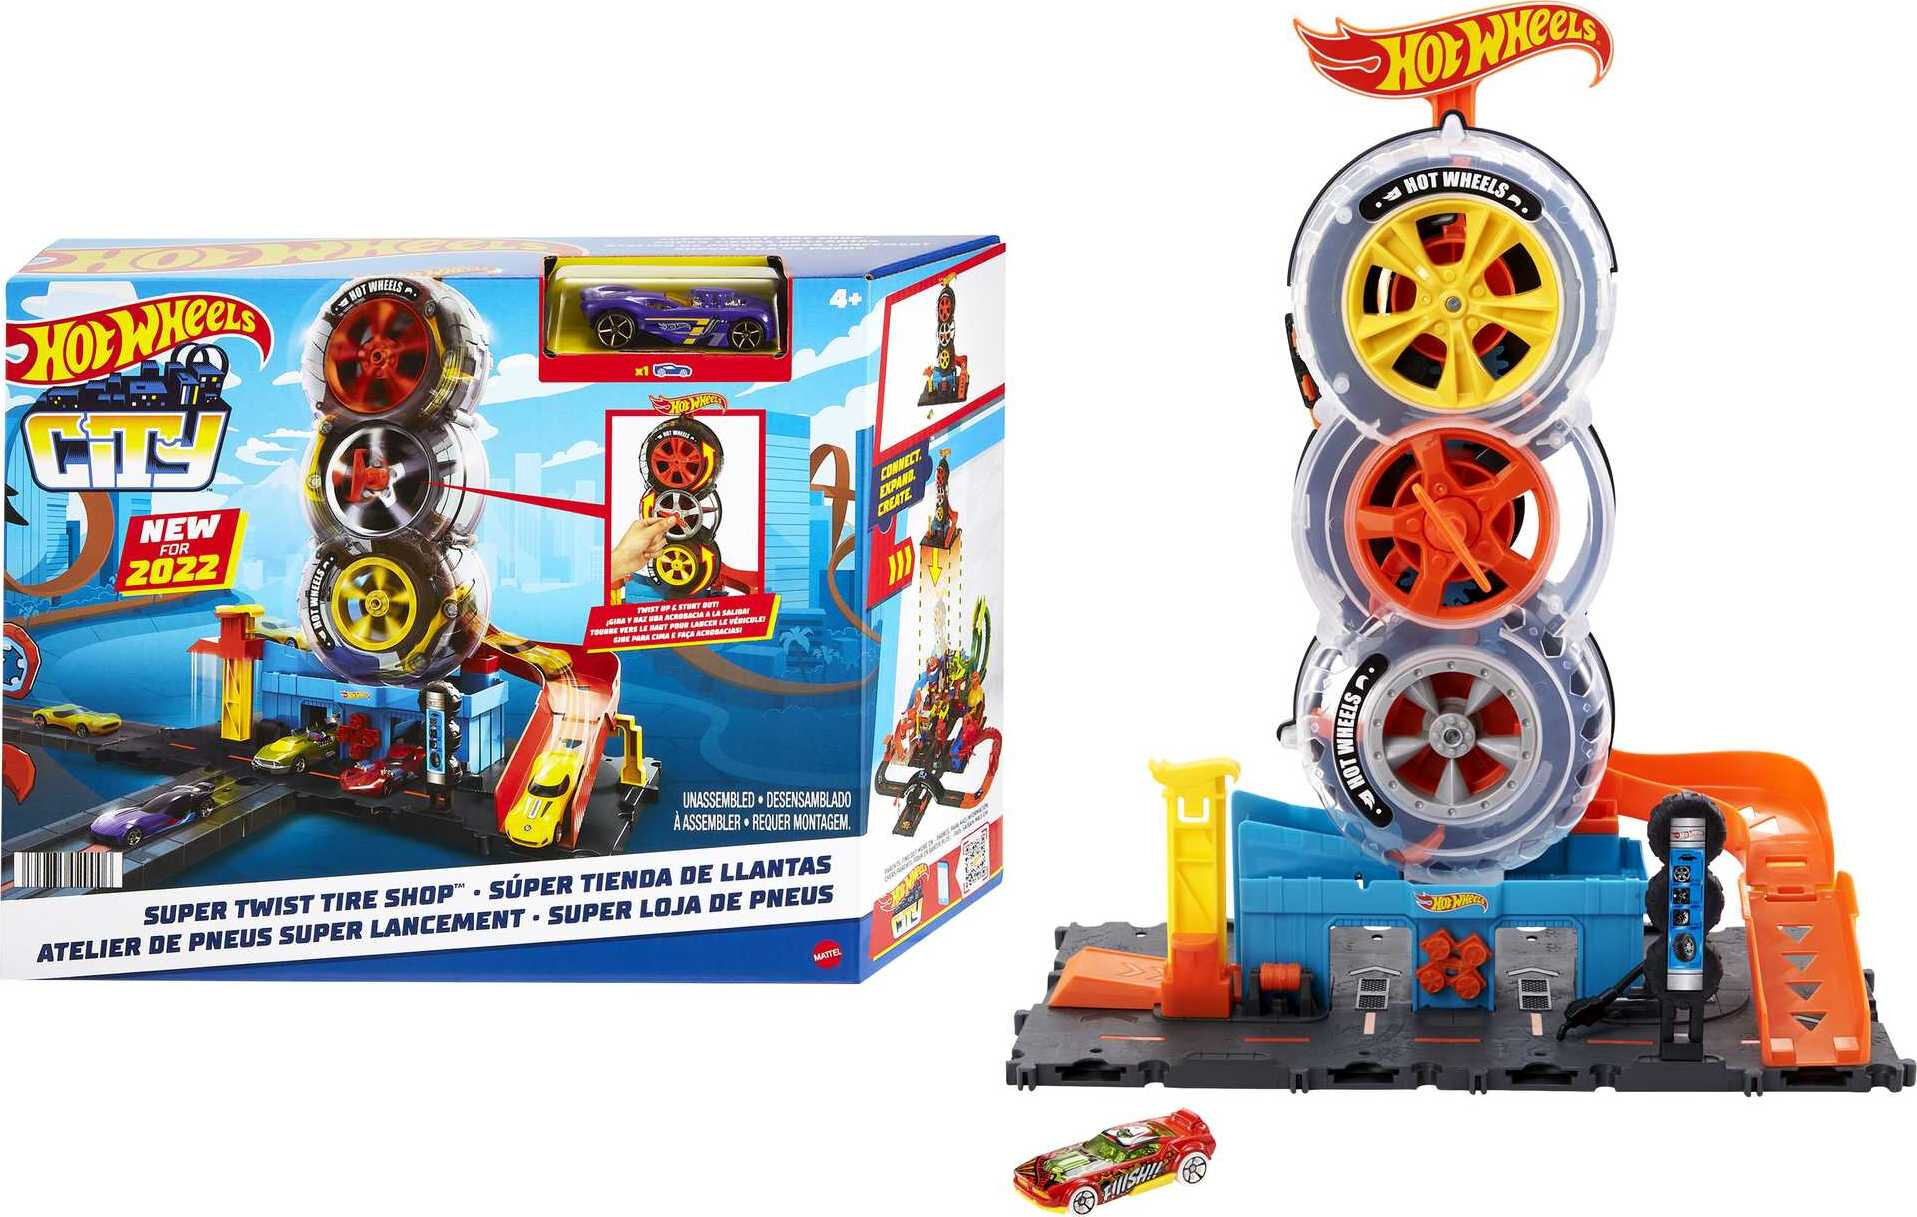 Hot Wheels City Super Twist Tire Shop Playset & 1:64 Scale Toy Car - image 1 of 7